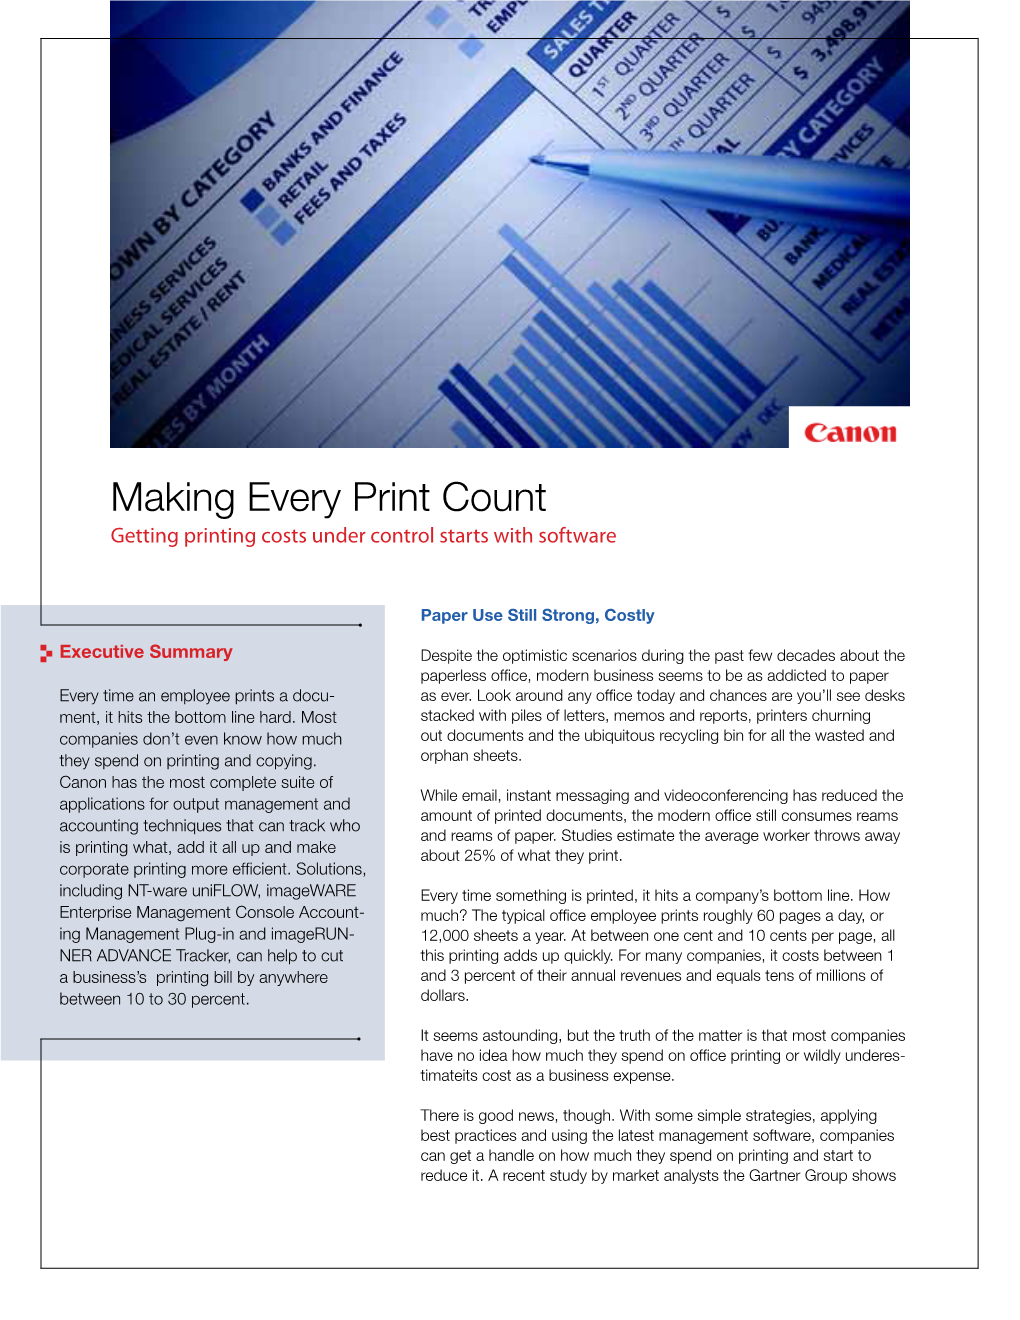 Making Every Print Count Getting Printing Costs Under Control Starts with Software